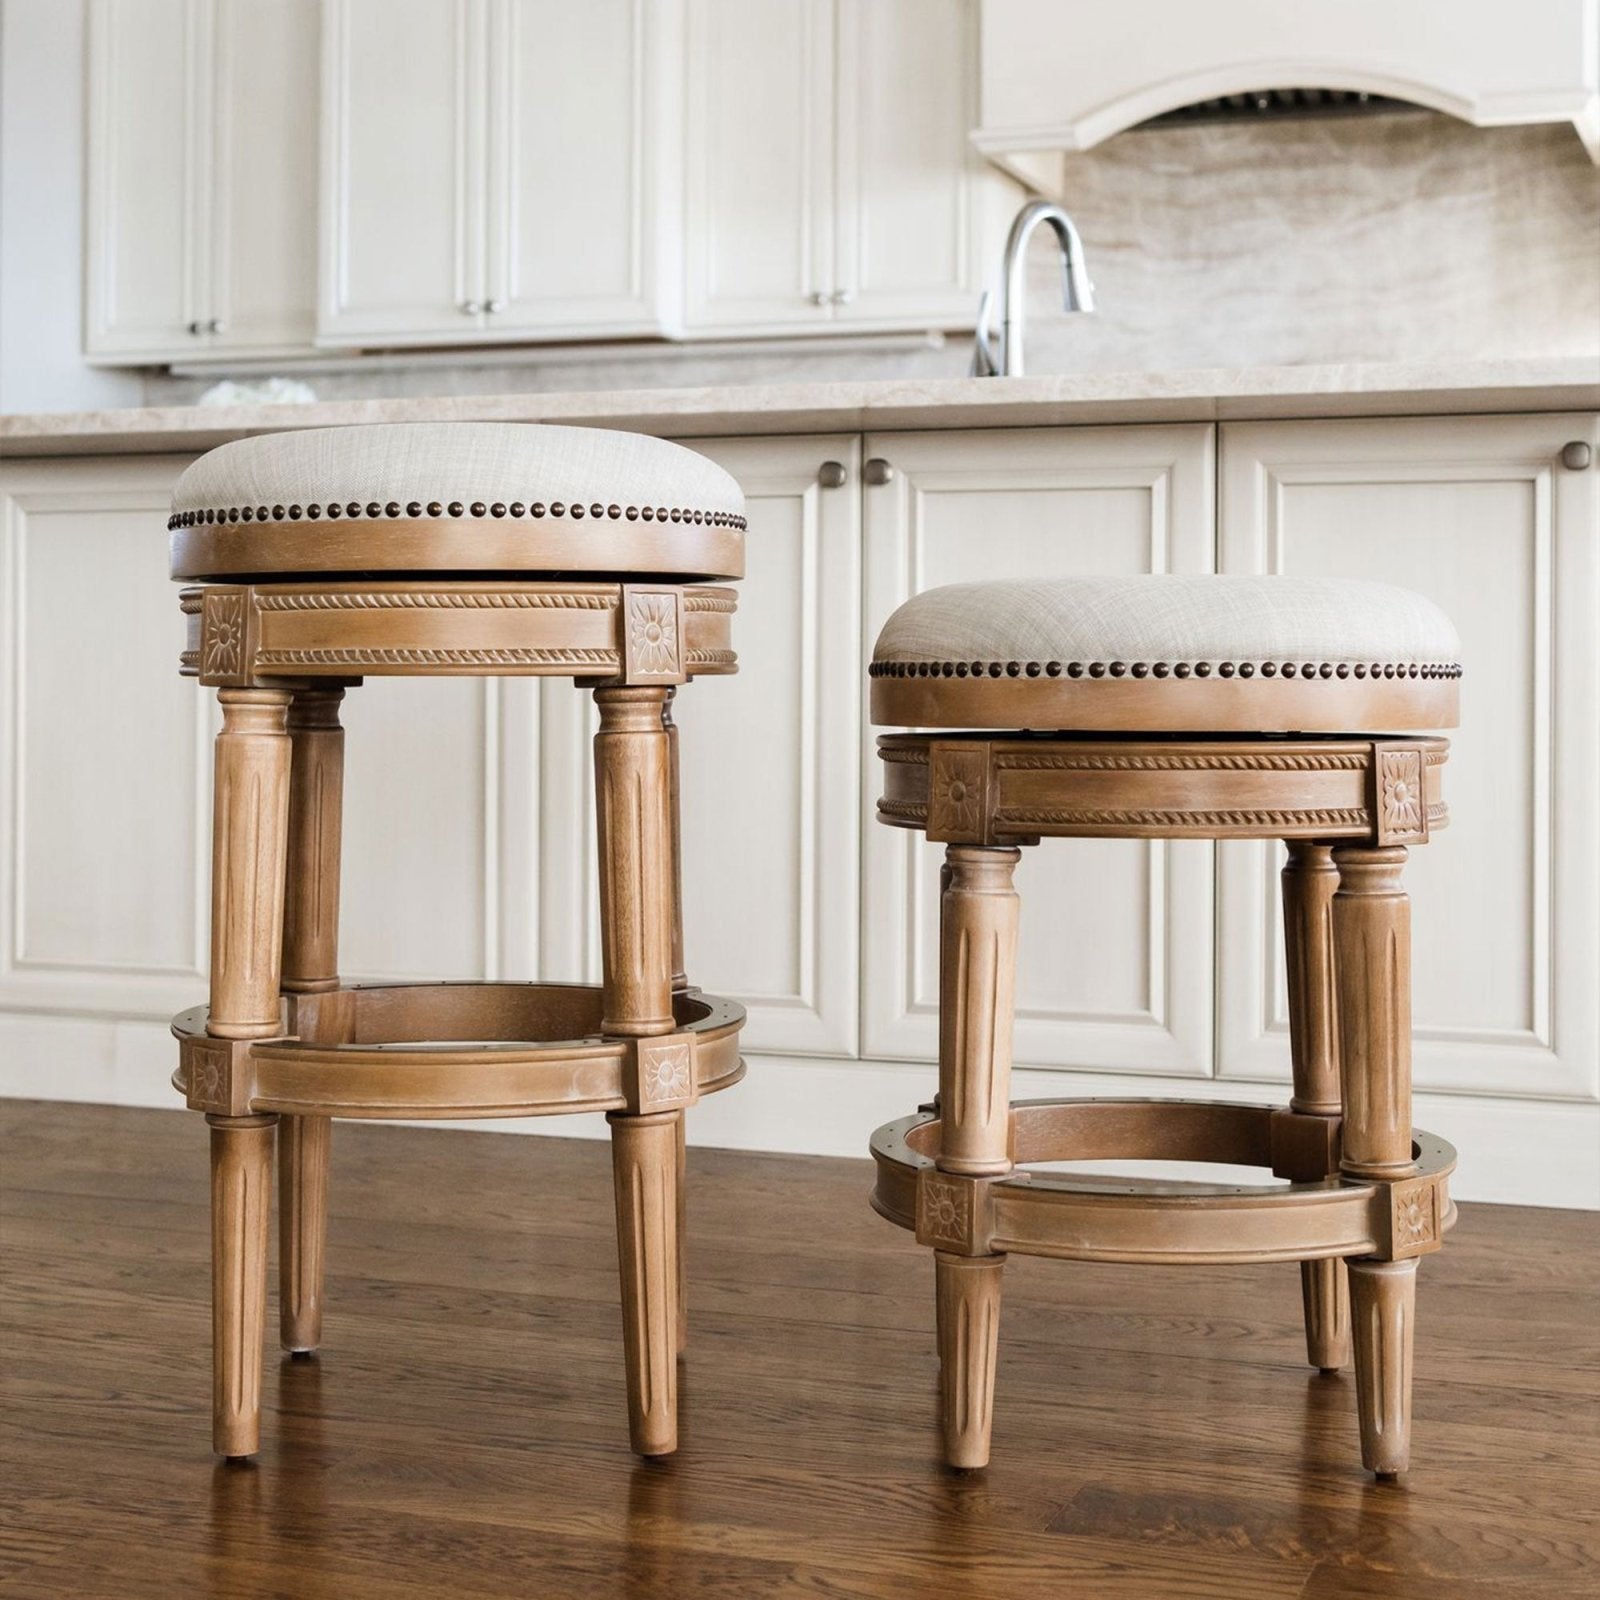 Pullman Backless Bar Stool in Weathered Oak Finish with Sand Color Fabric Upholstery in Stools by Maven Lane